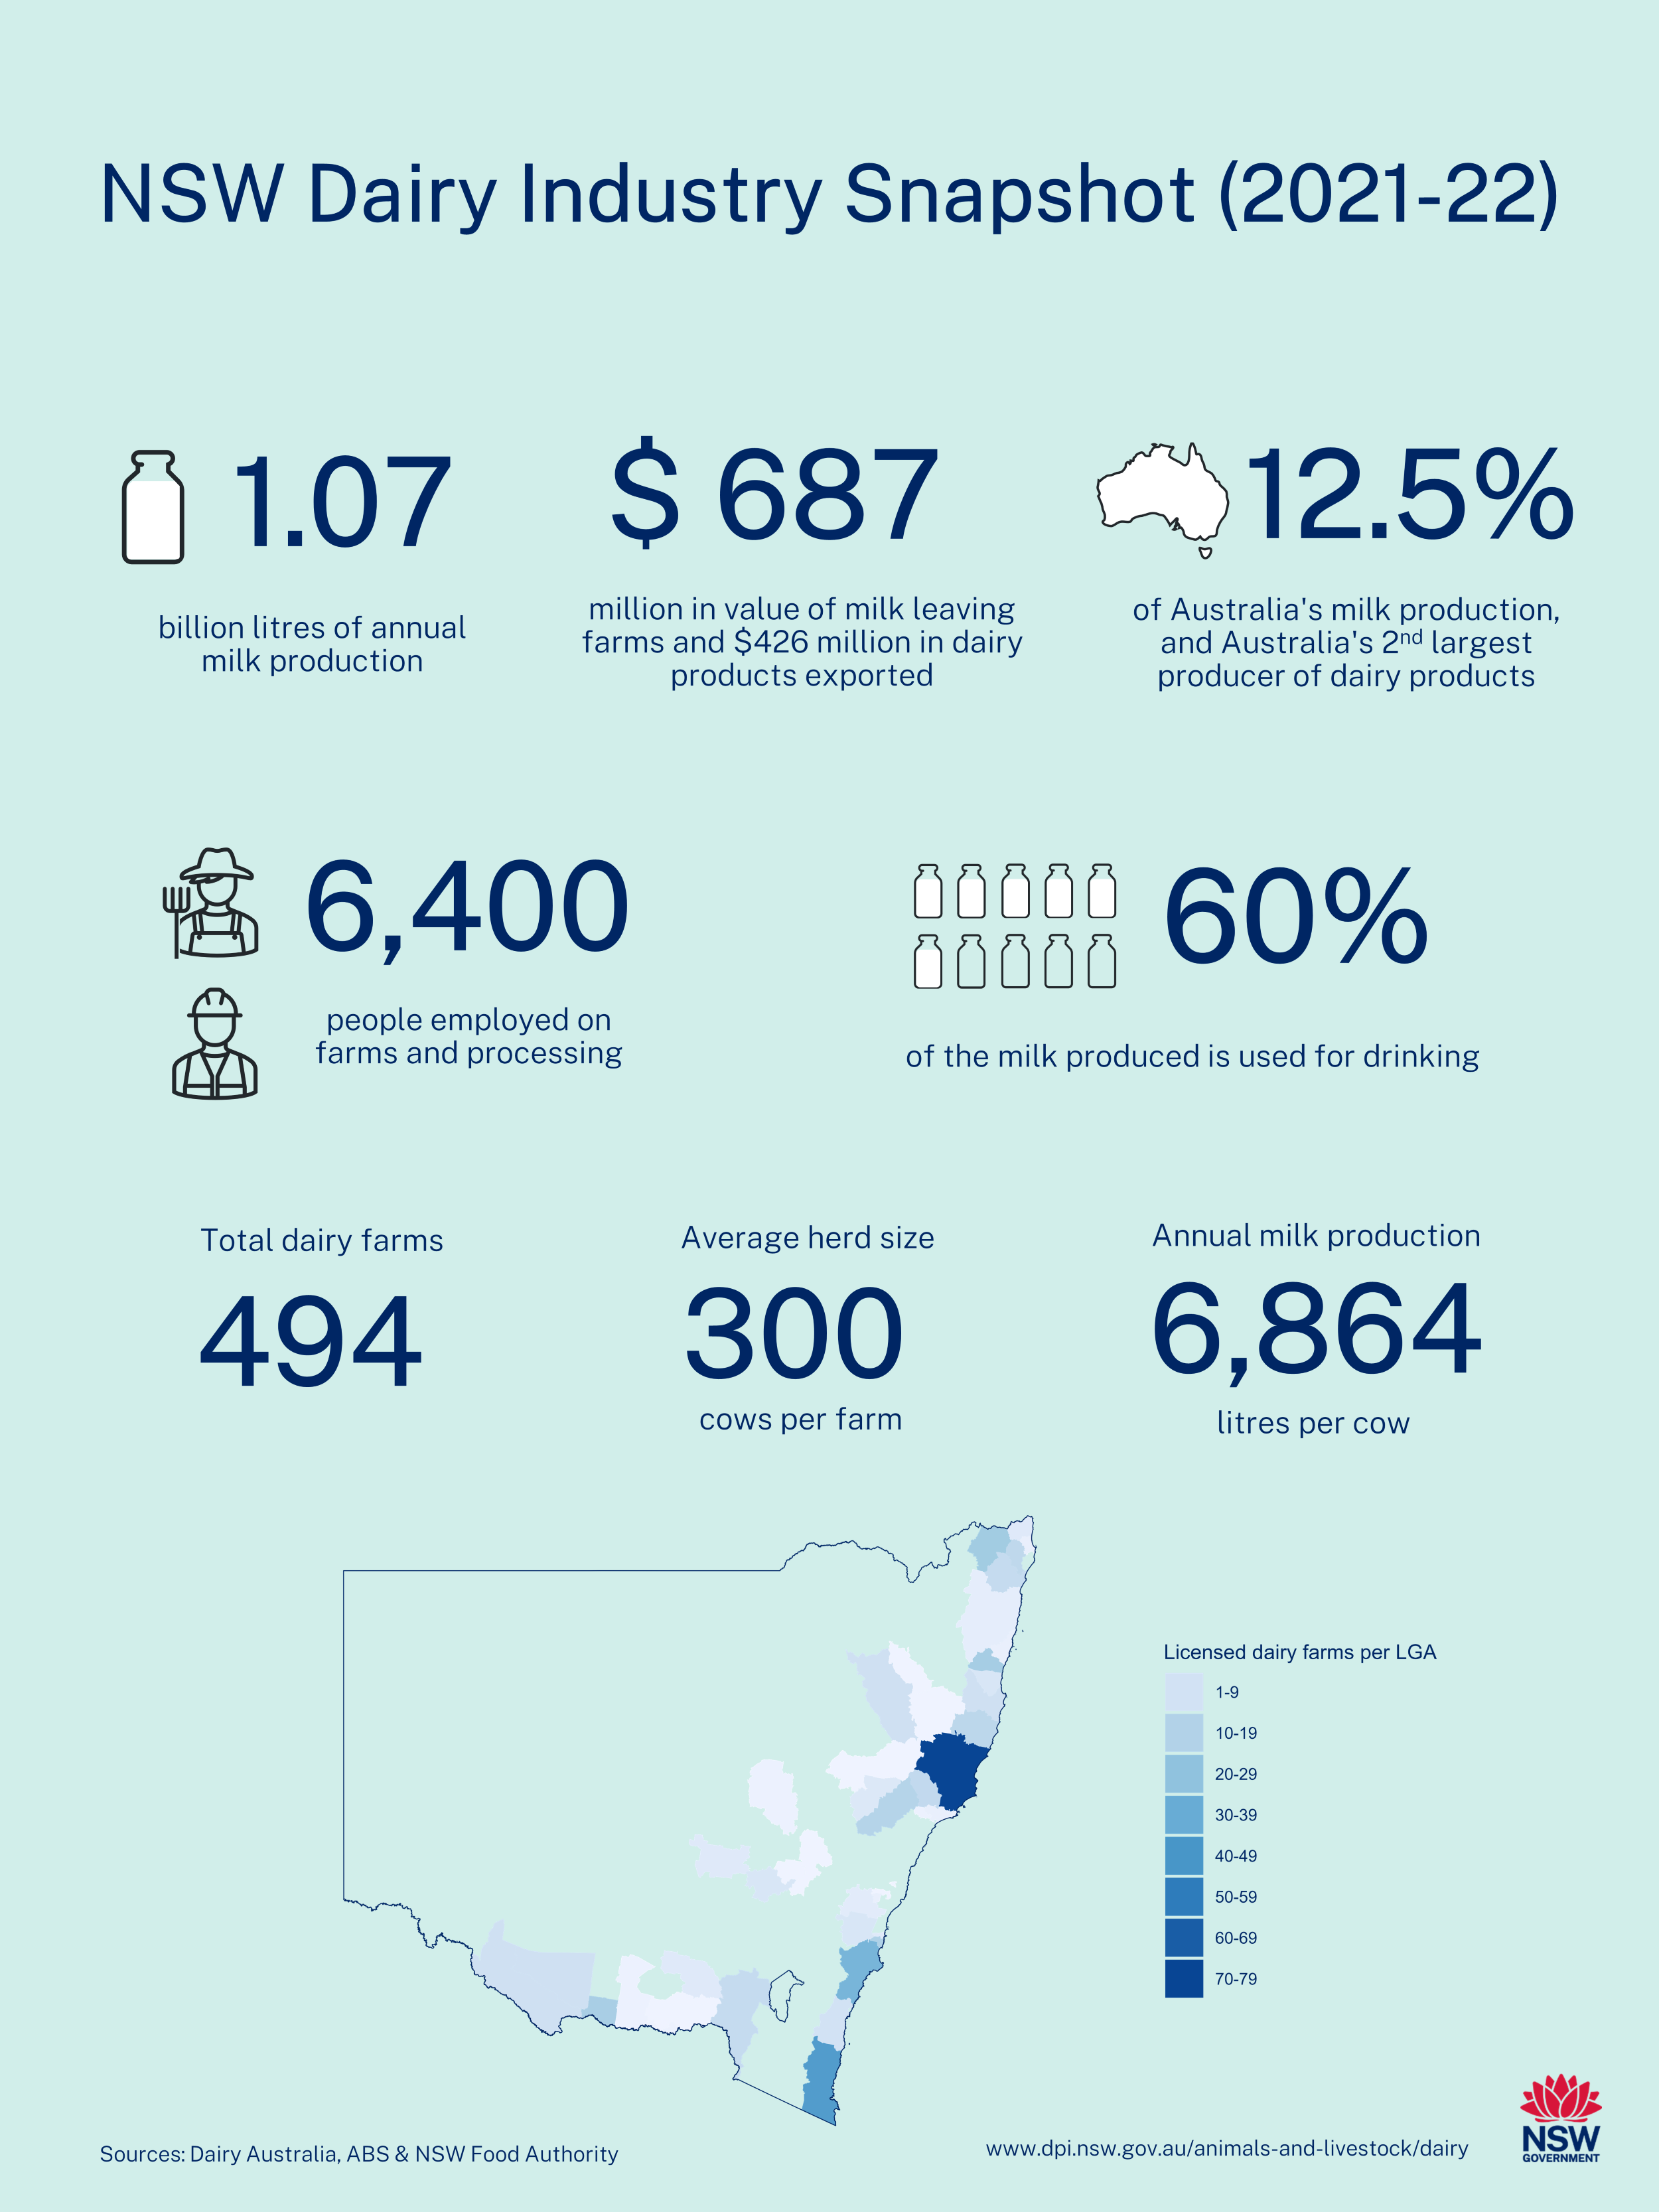 Snapshot of the NSW Dairy Industry